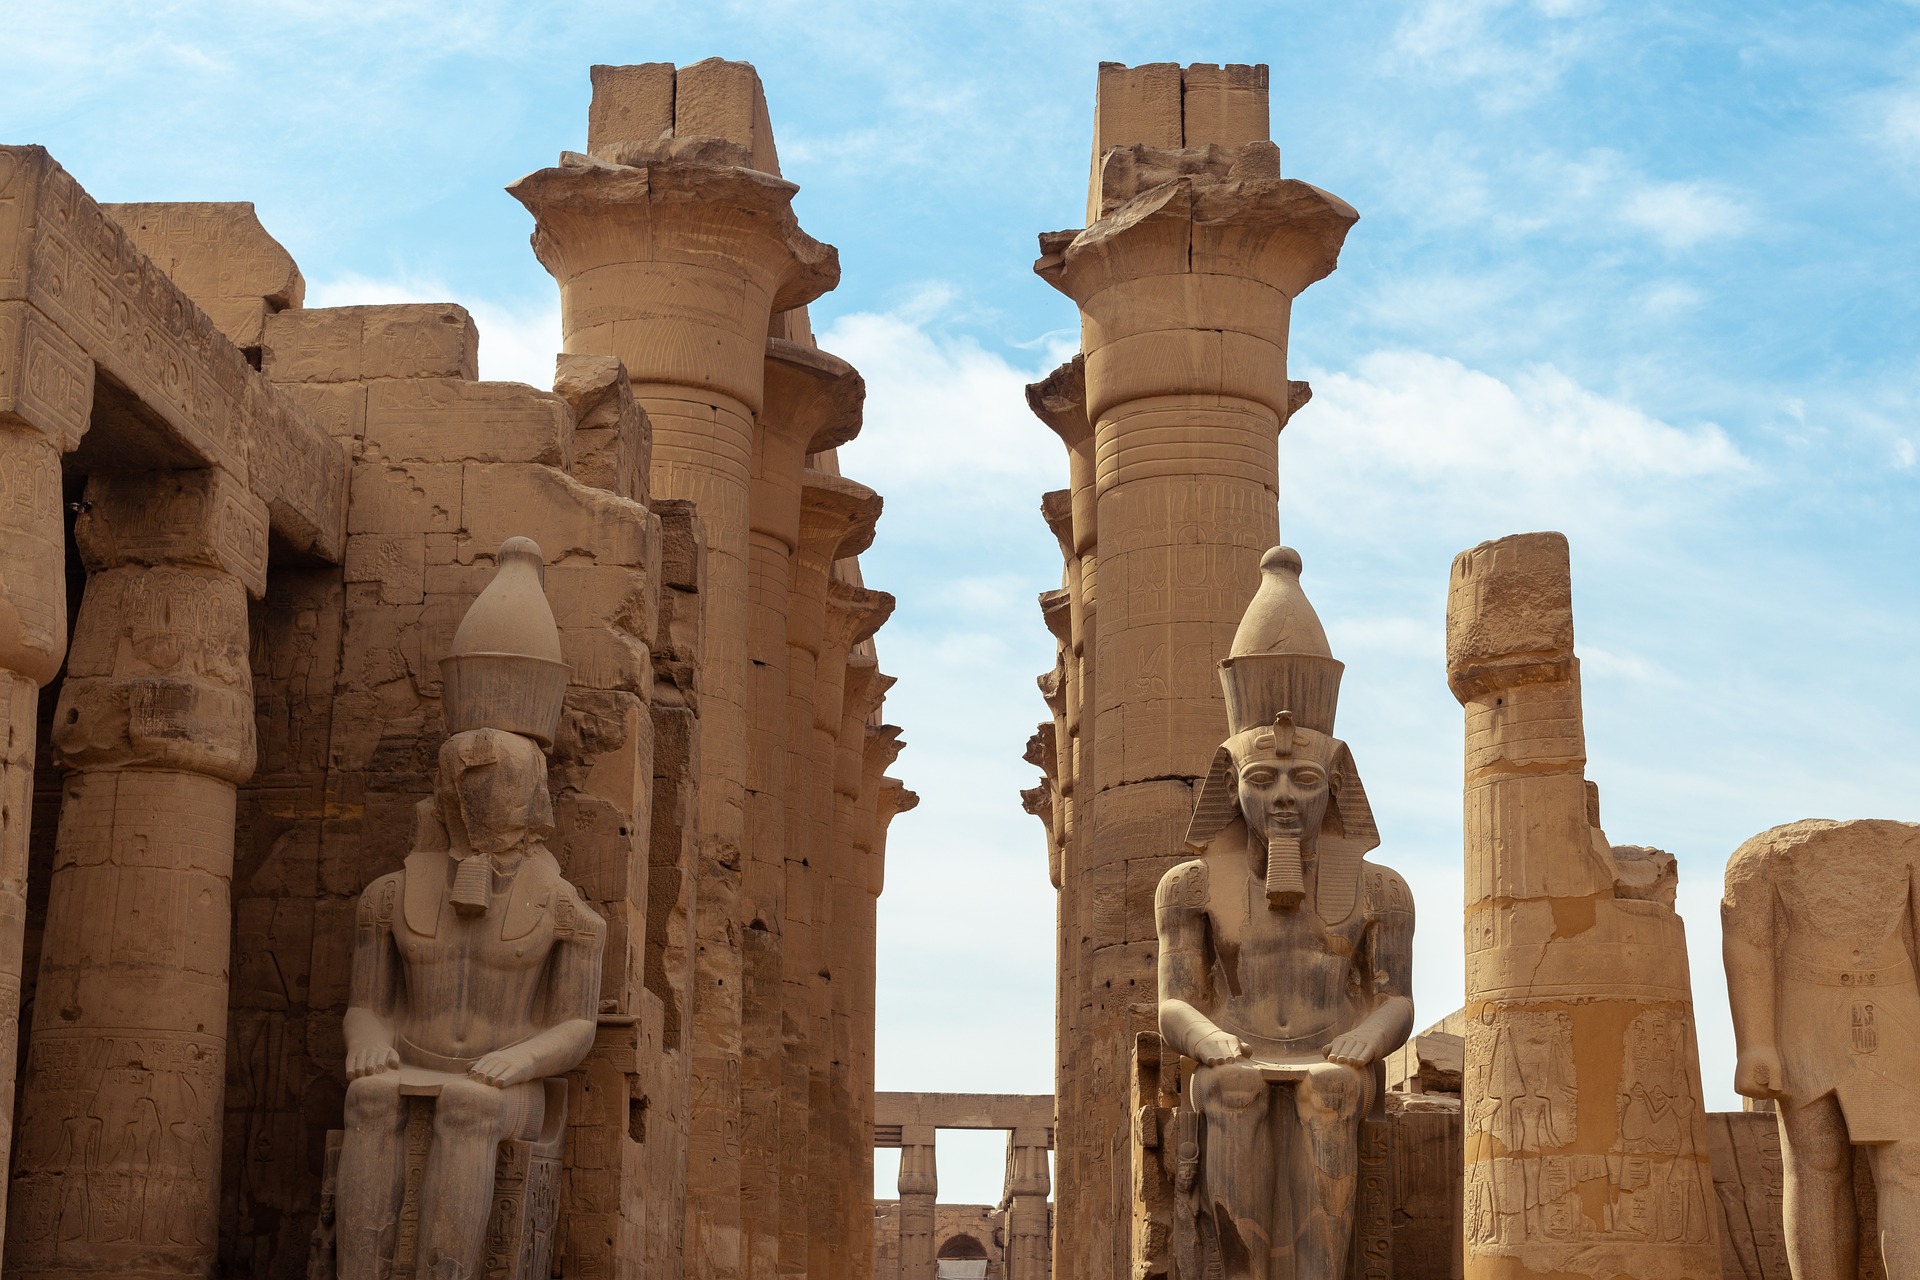  Ruins of the Luxor Temple complex, including large columns and statues of Egyptian pharaohs.